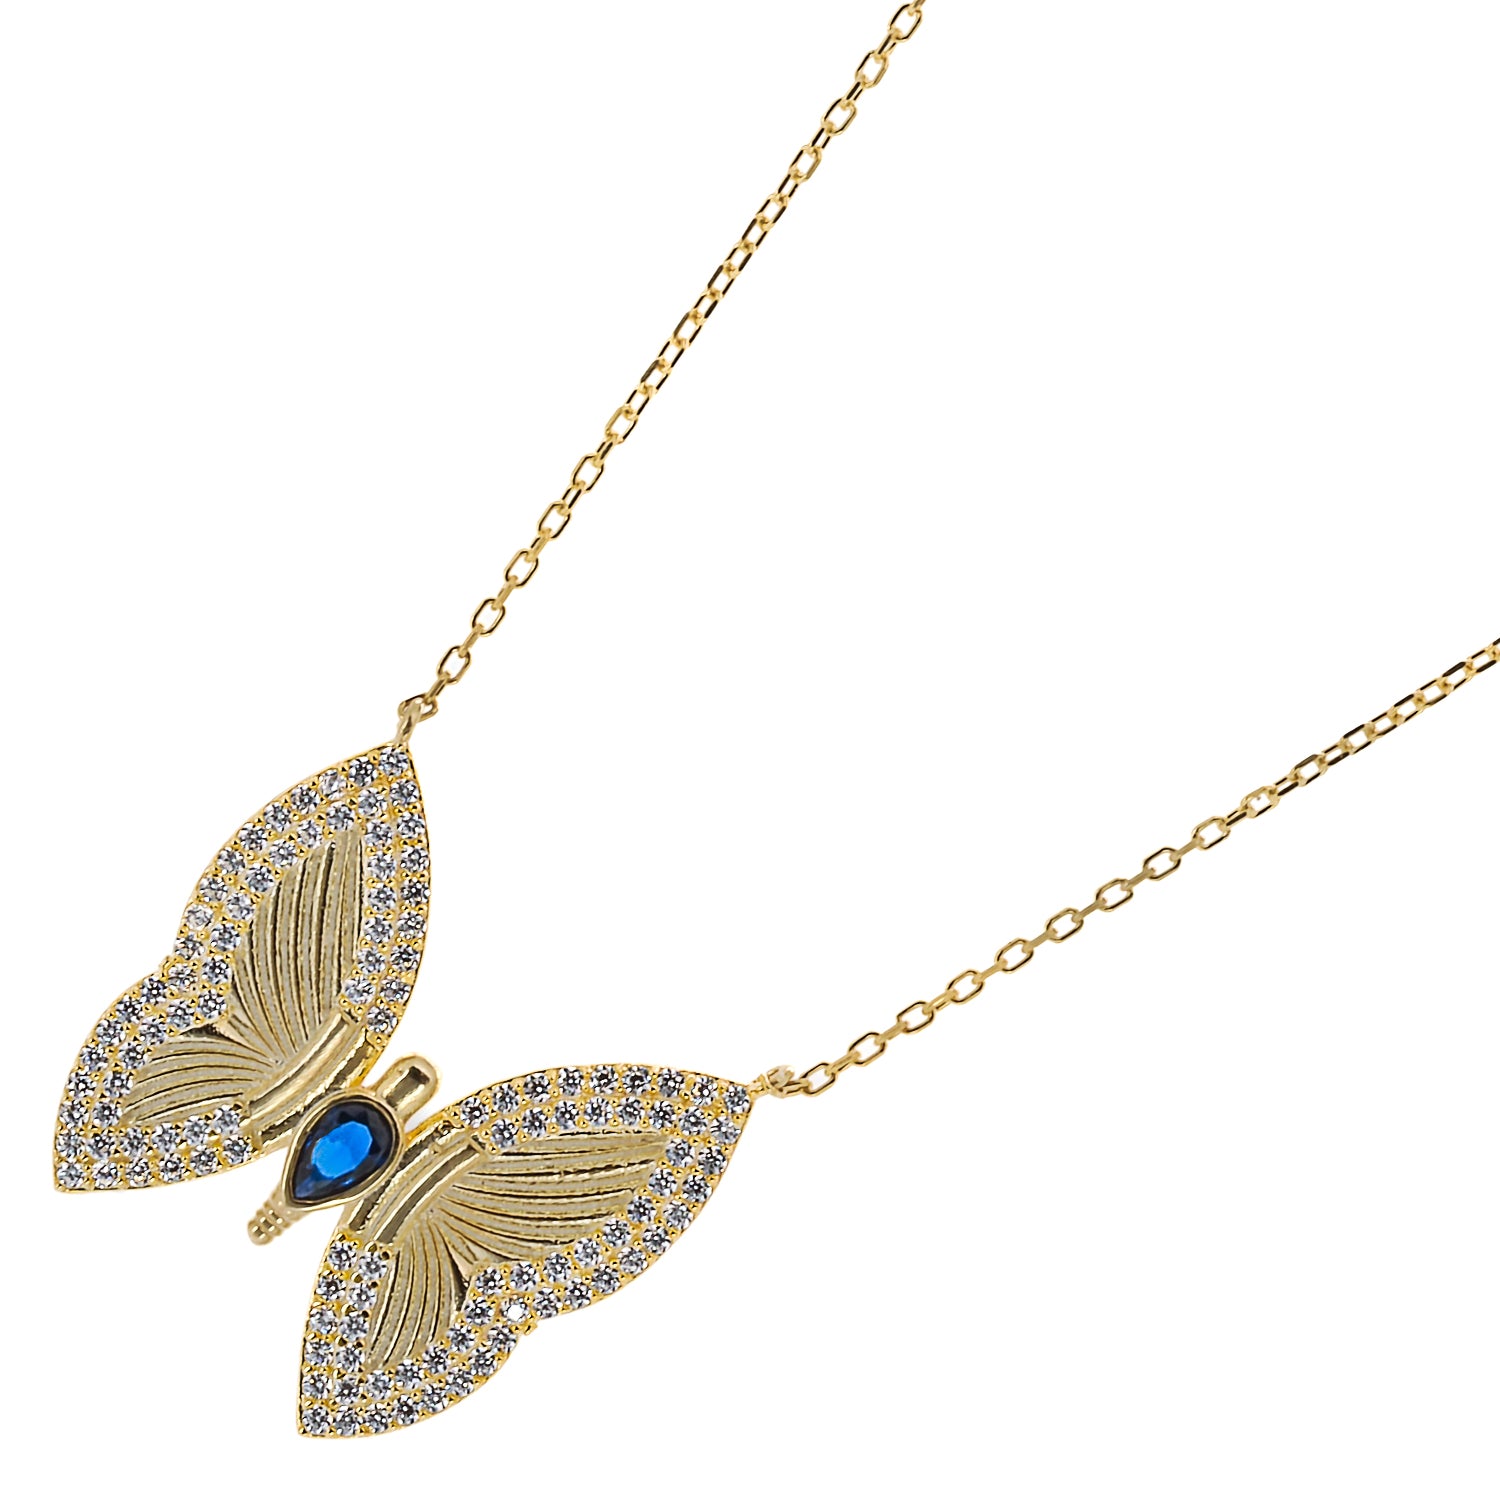 Close-up shot of the butterfly pendant on the necklace, showcasing the shimmering CZ diamonds and the vibrant sapphire stone, symbolizing hope and positivity.